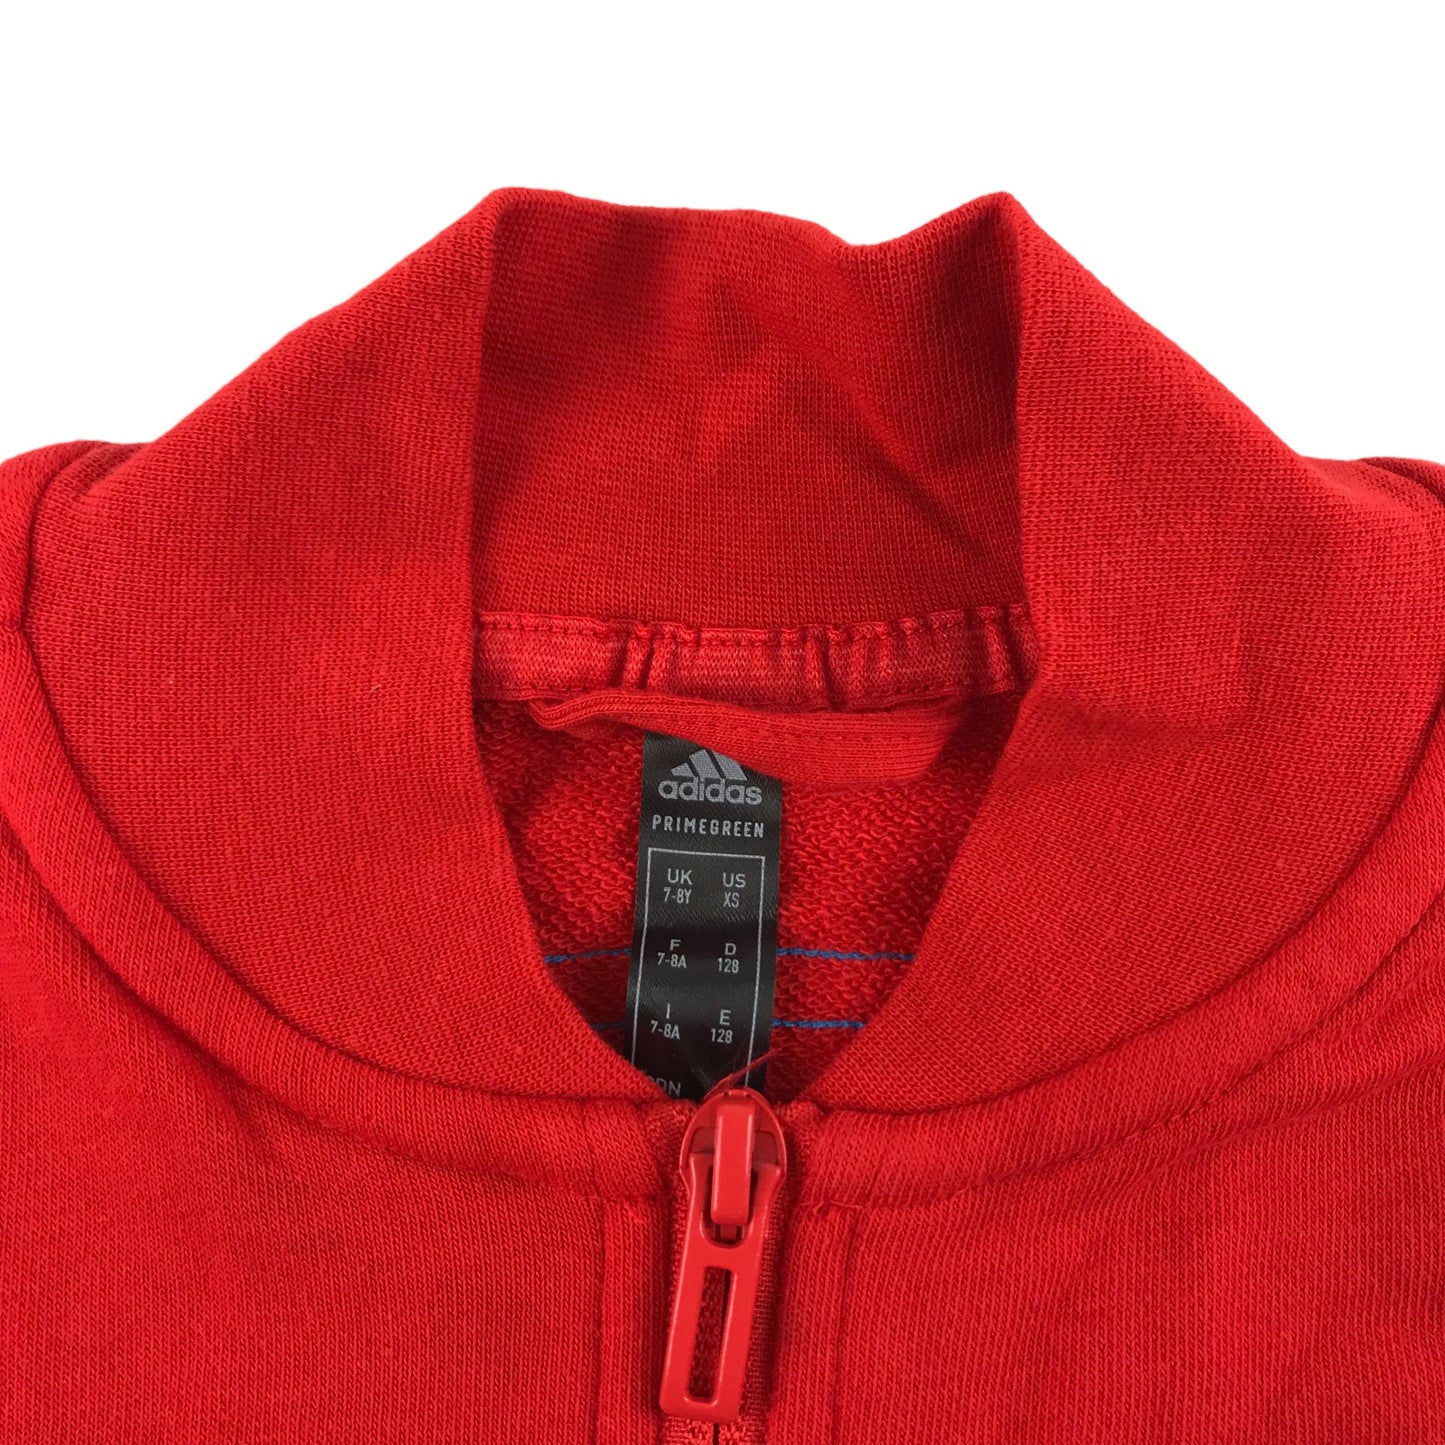 Adidas x LEGO Sweater Age 7 Red Full Zipper Jersey